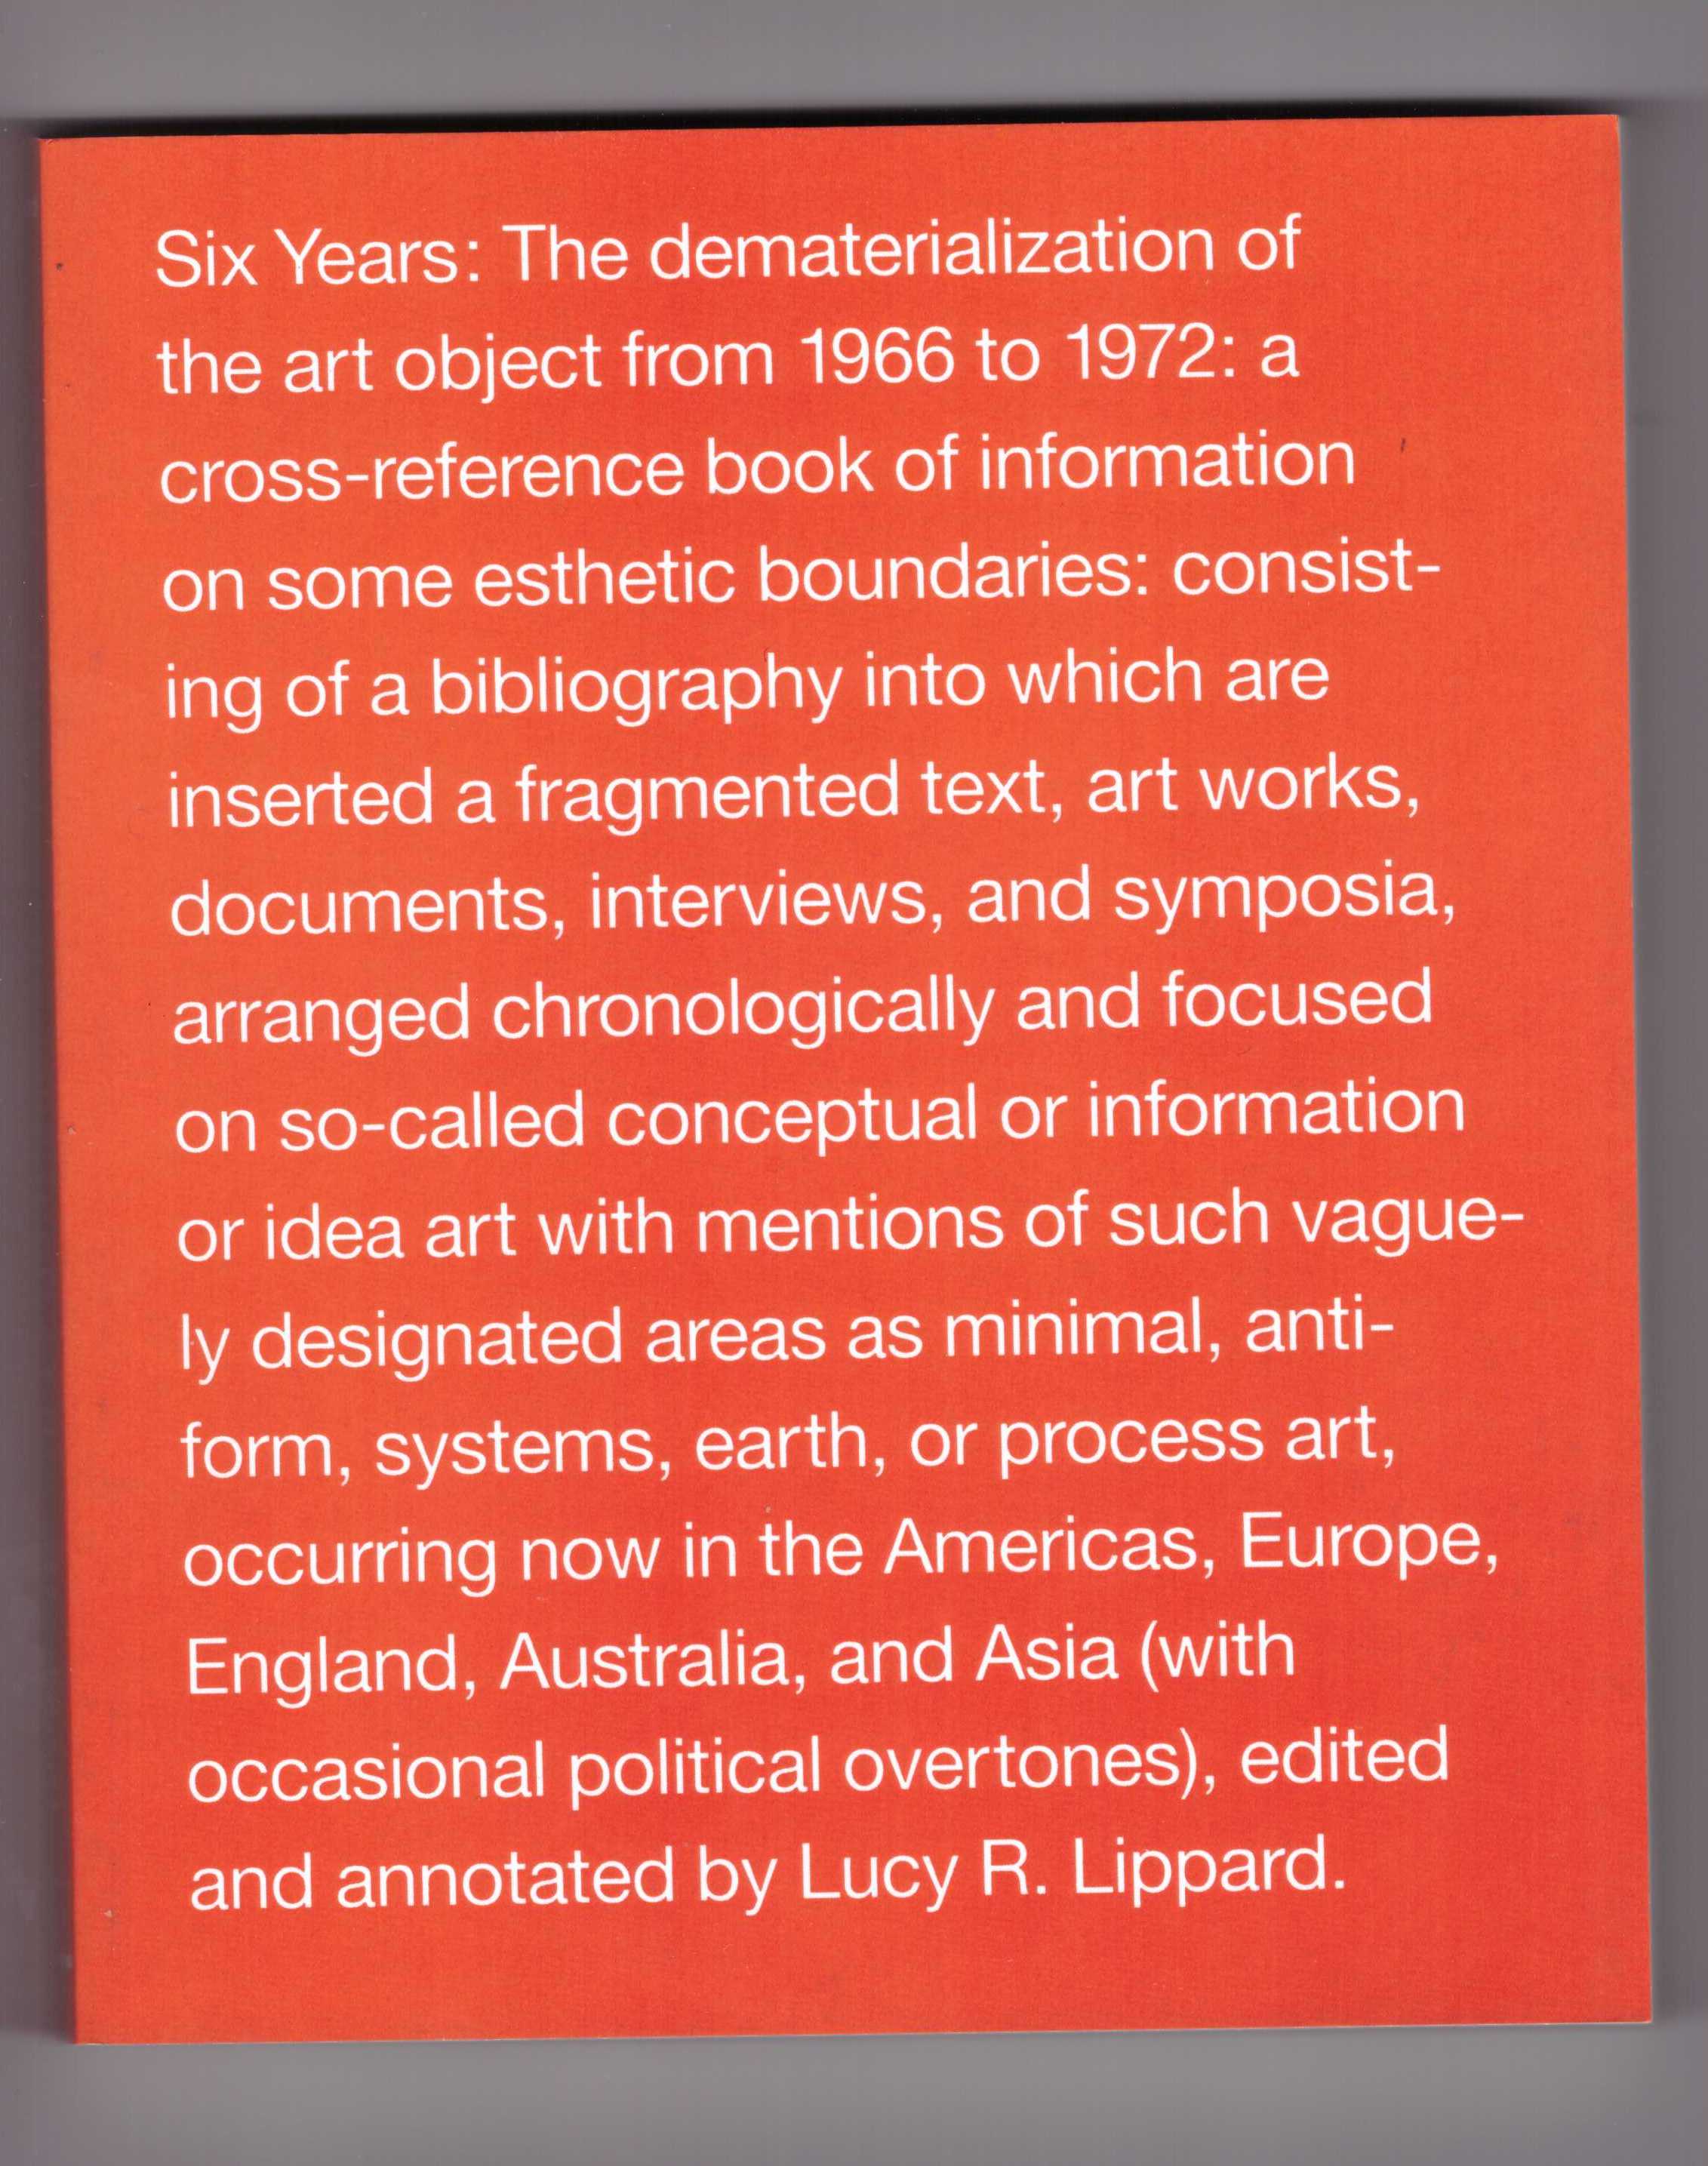 LIPPARD, Lucy R. - Six Years: The dematerialization of the art object from 1966 to 1972